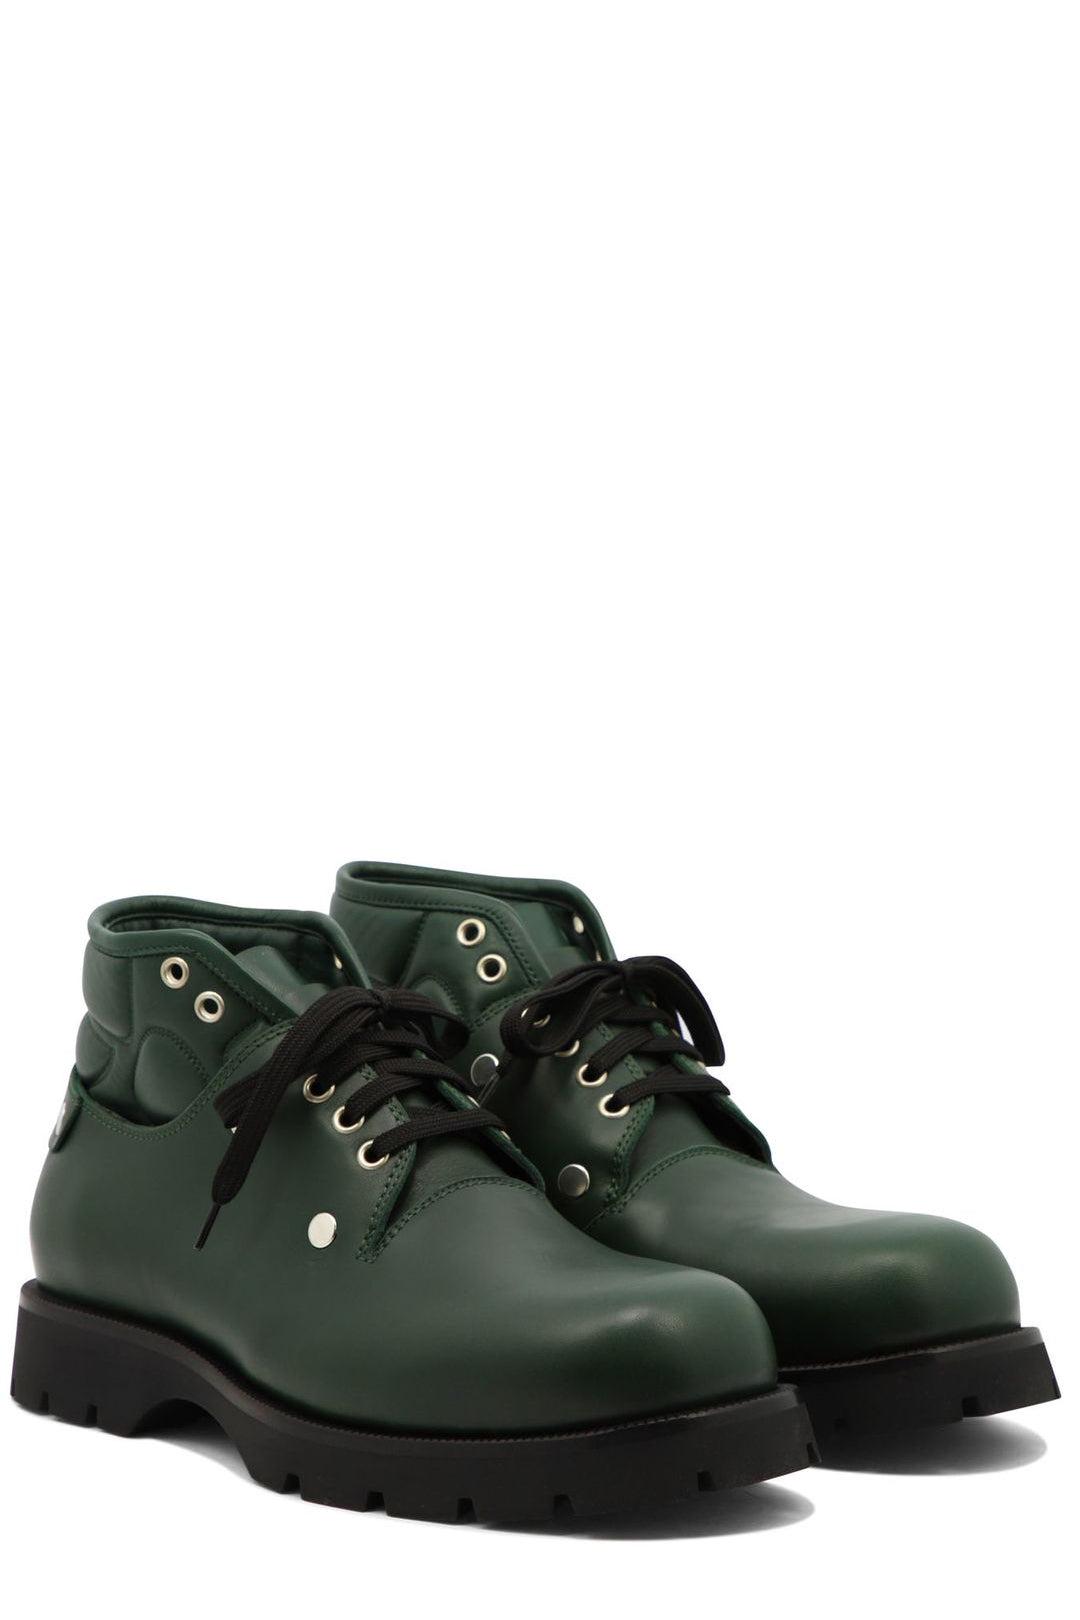 Jil Sander Leather Ankle Lace-up Boots in Green for Men | Lyst